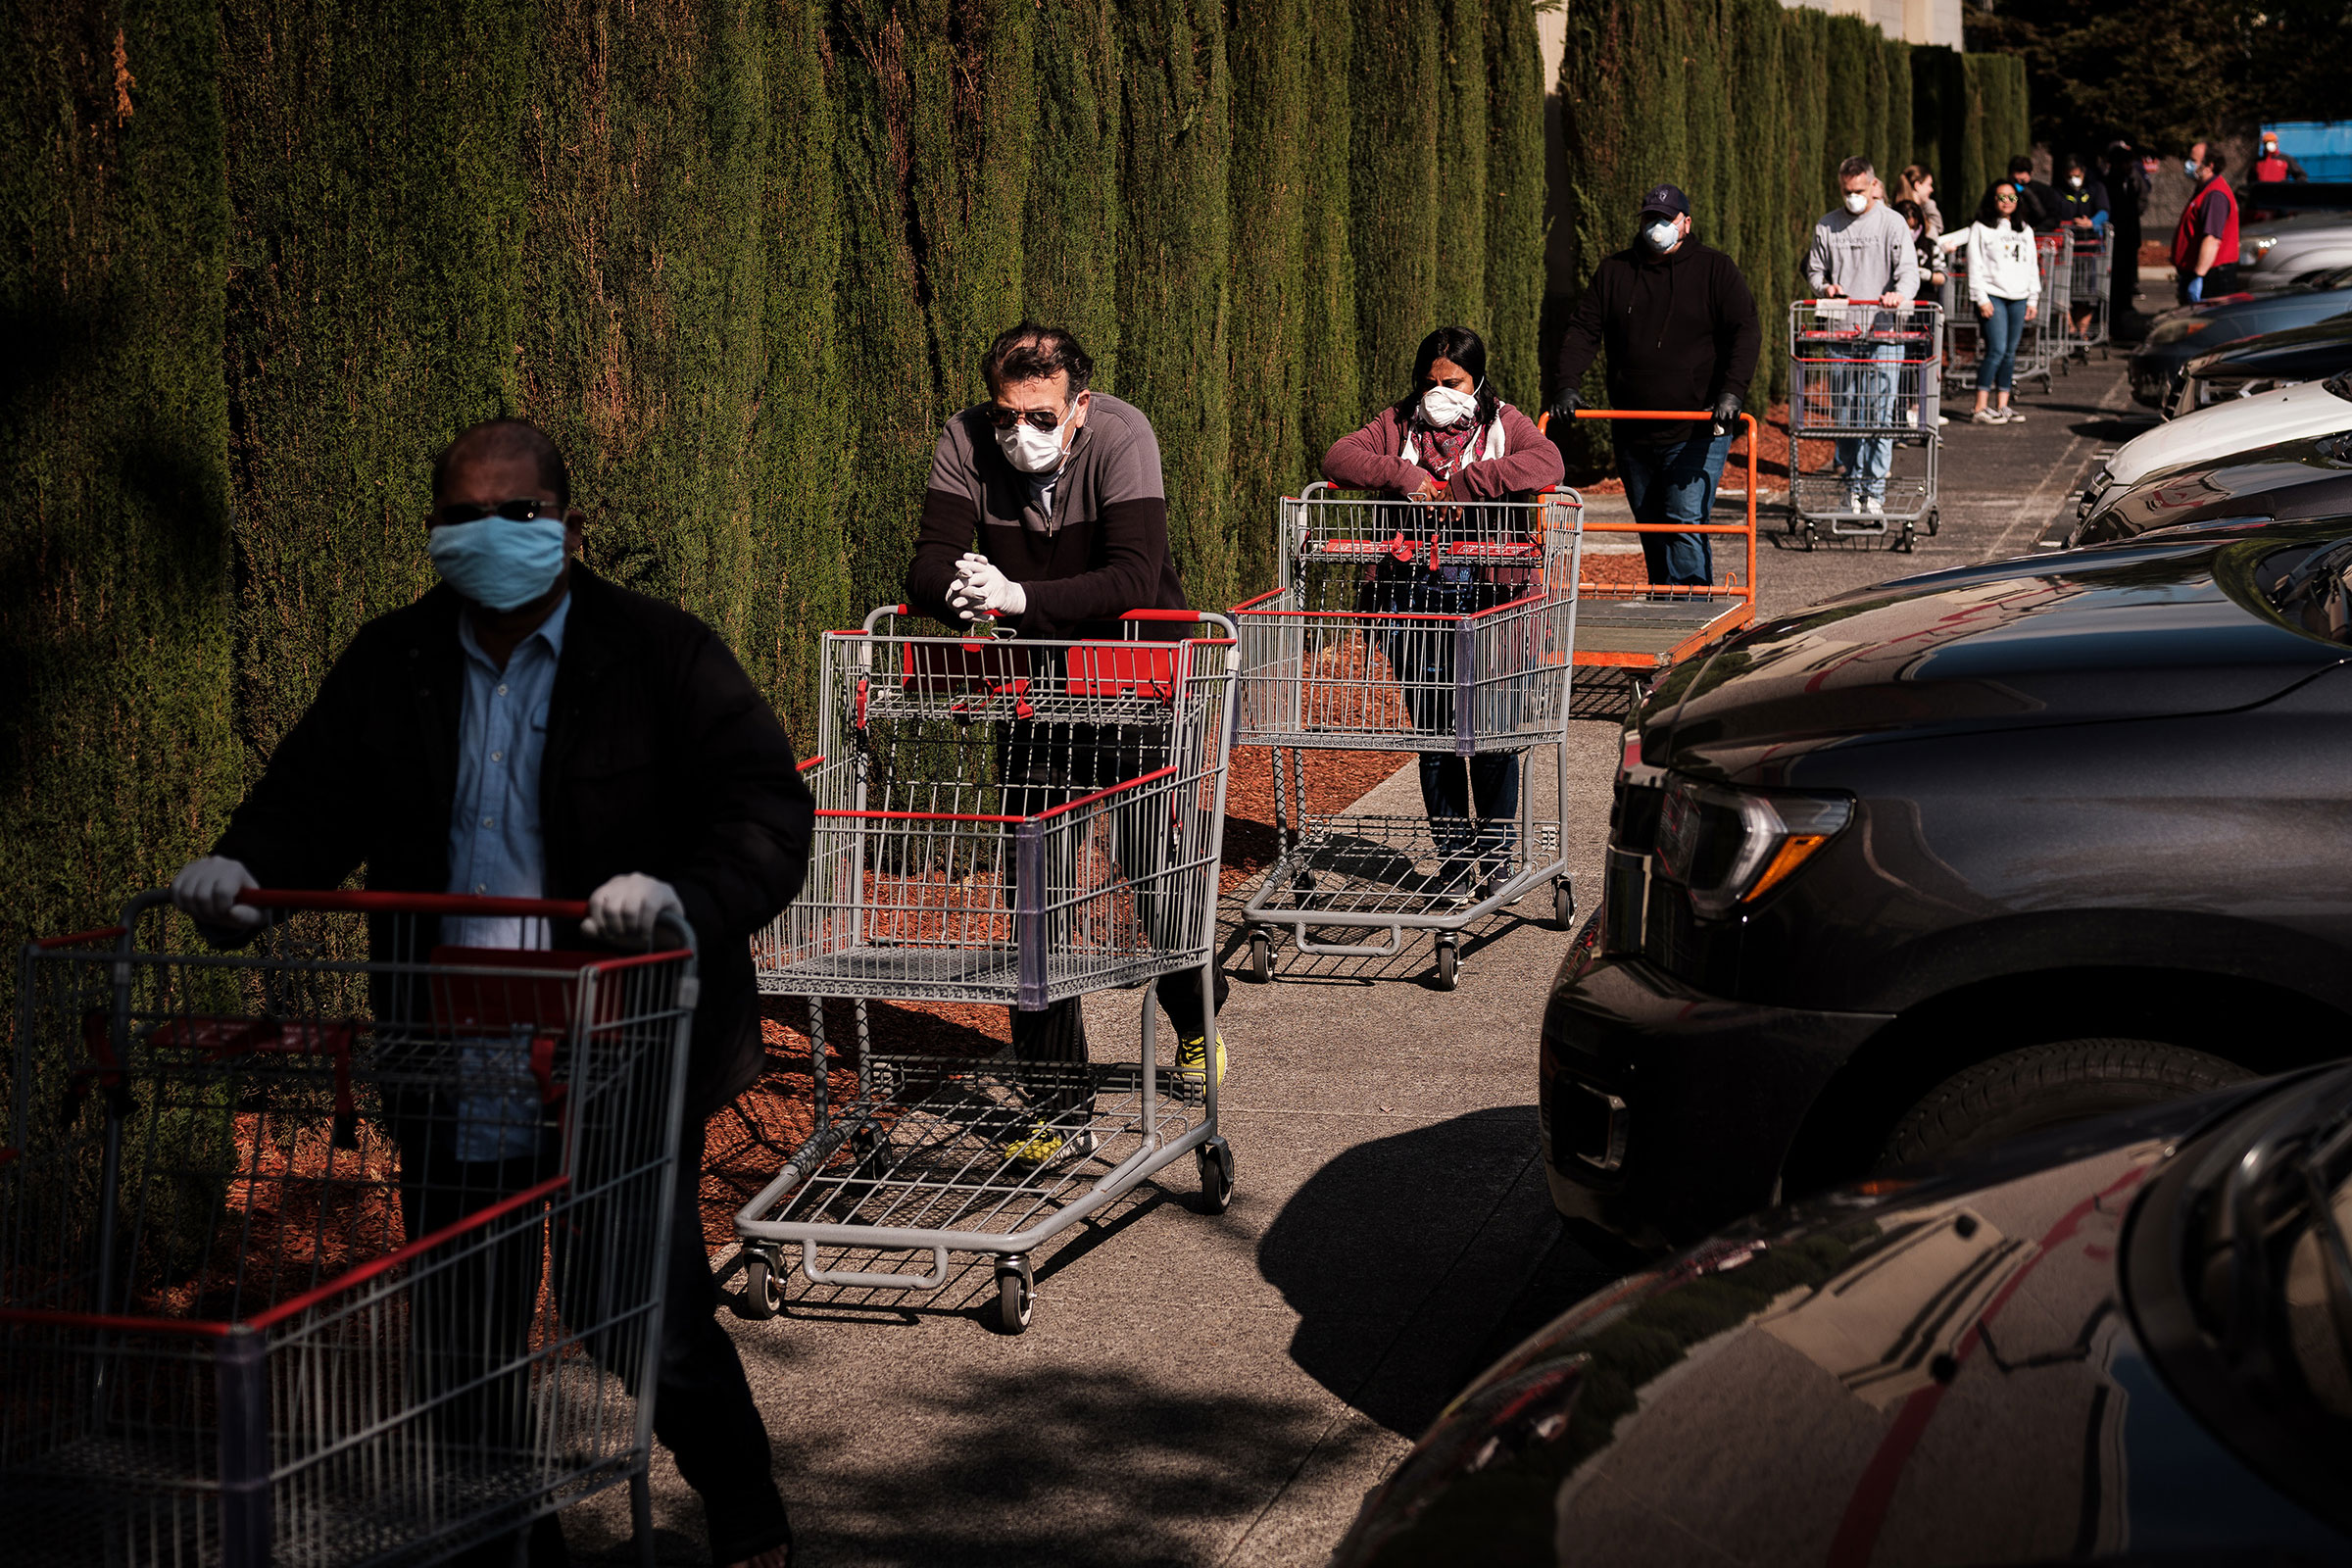 People line up outside a grocery store in Livermore, Calif. on April 10, 2020. (Max Whittaker/The New York Times)